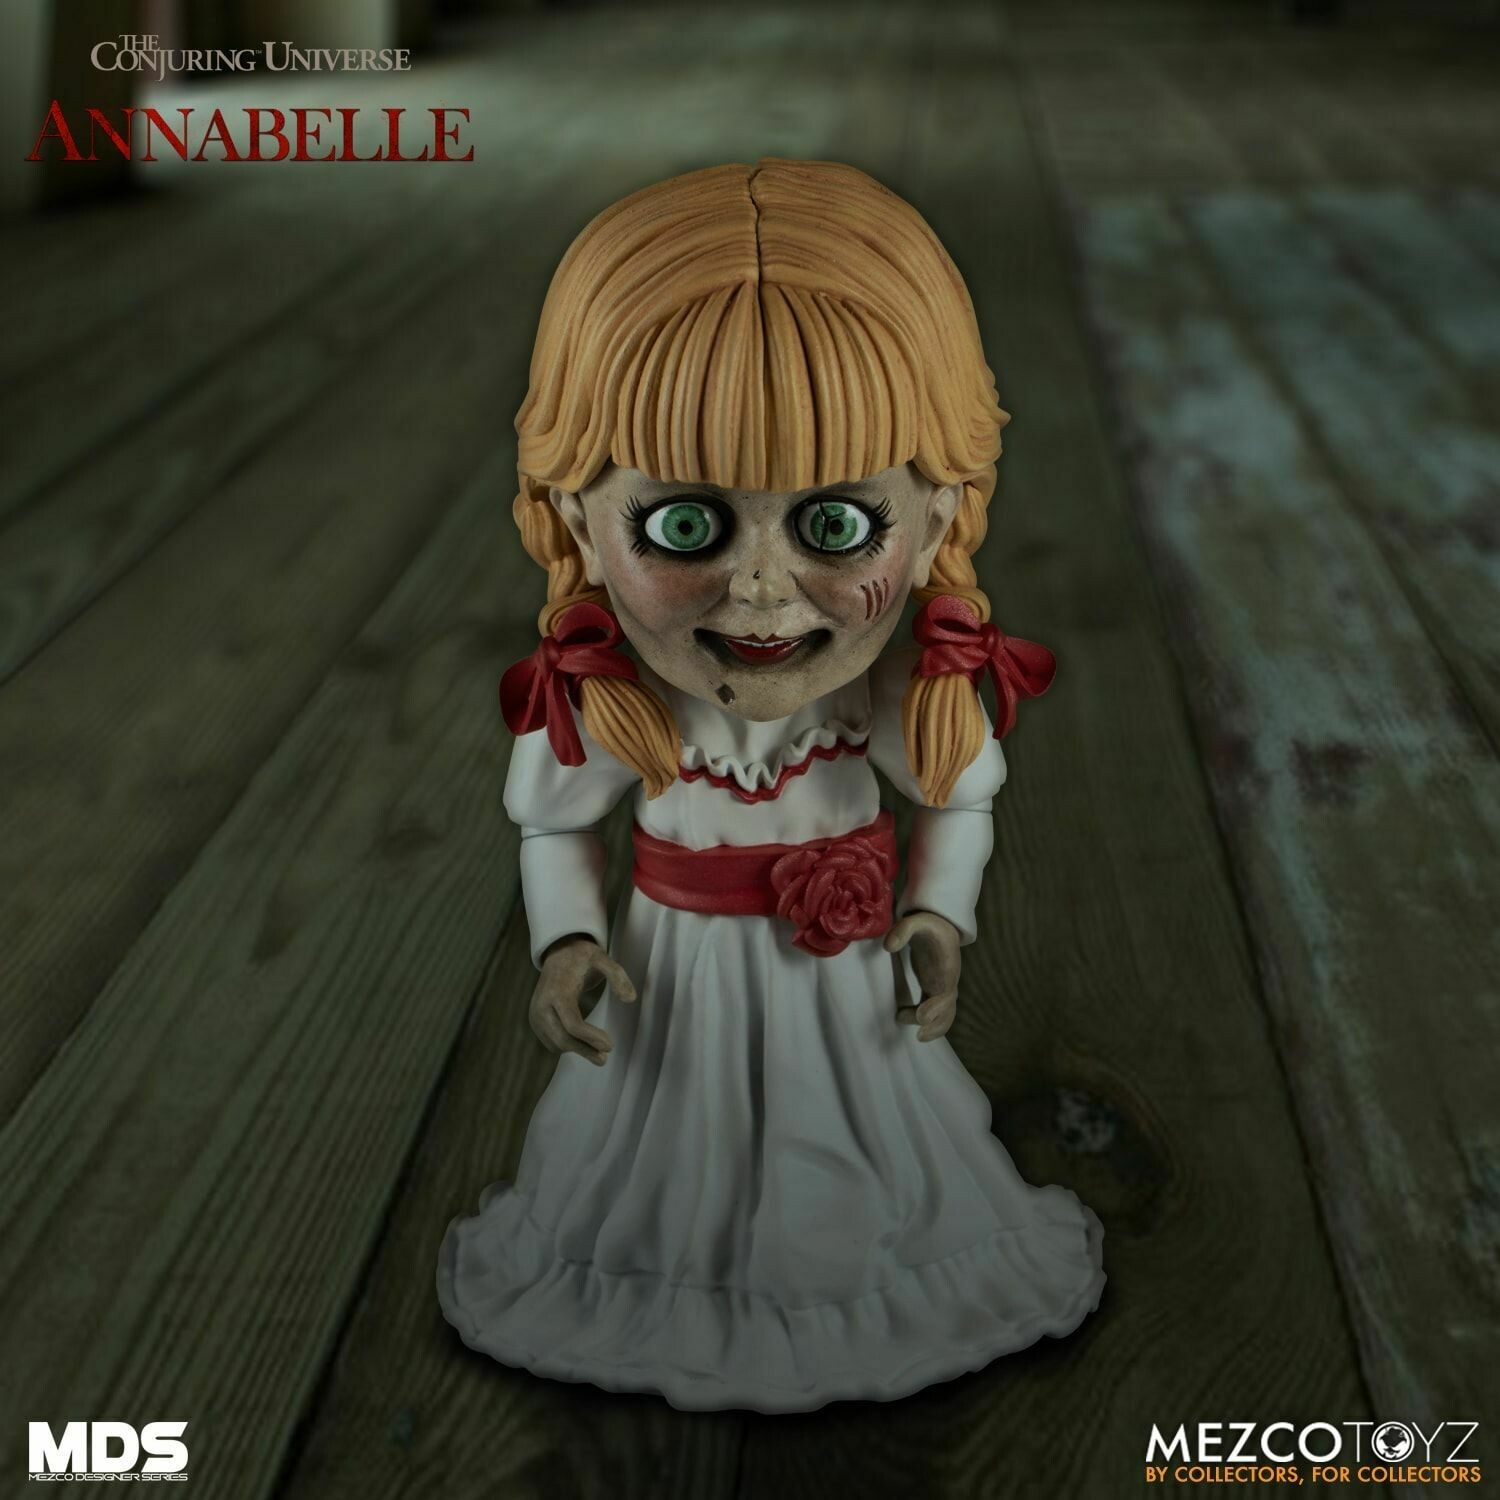 PRE-ORDER Mezco MDS Stylized Annabelle the conjuring